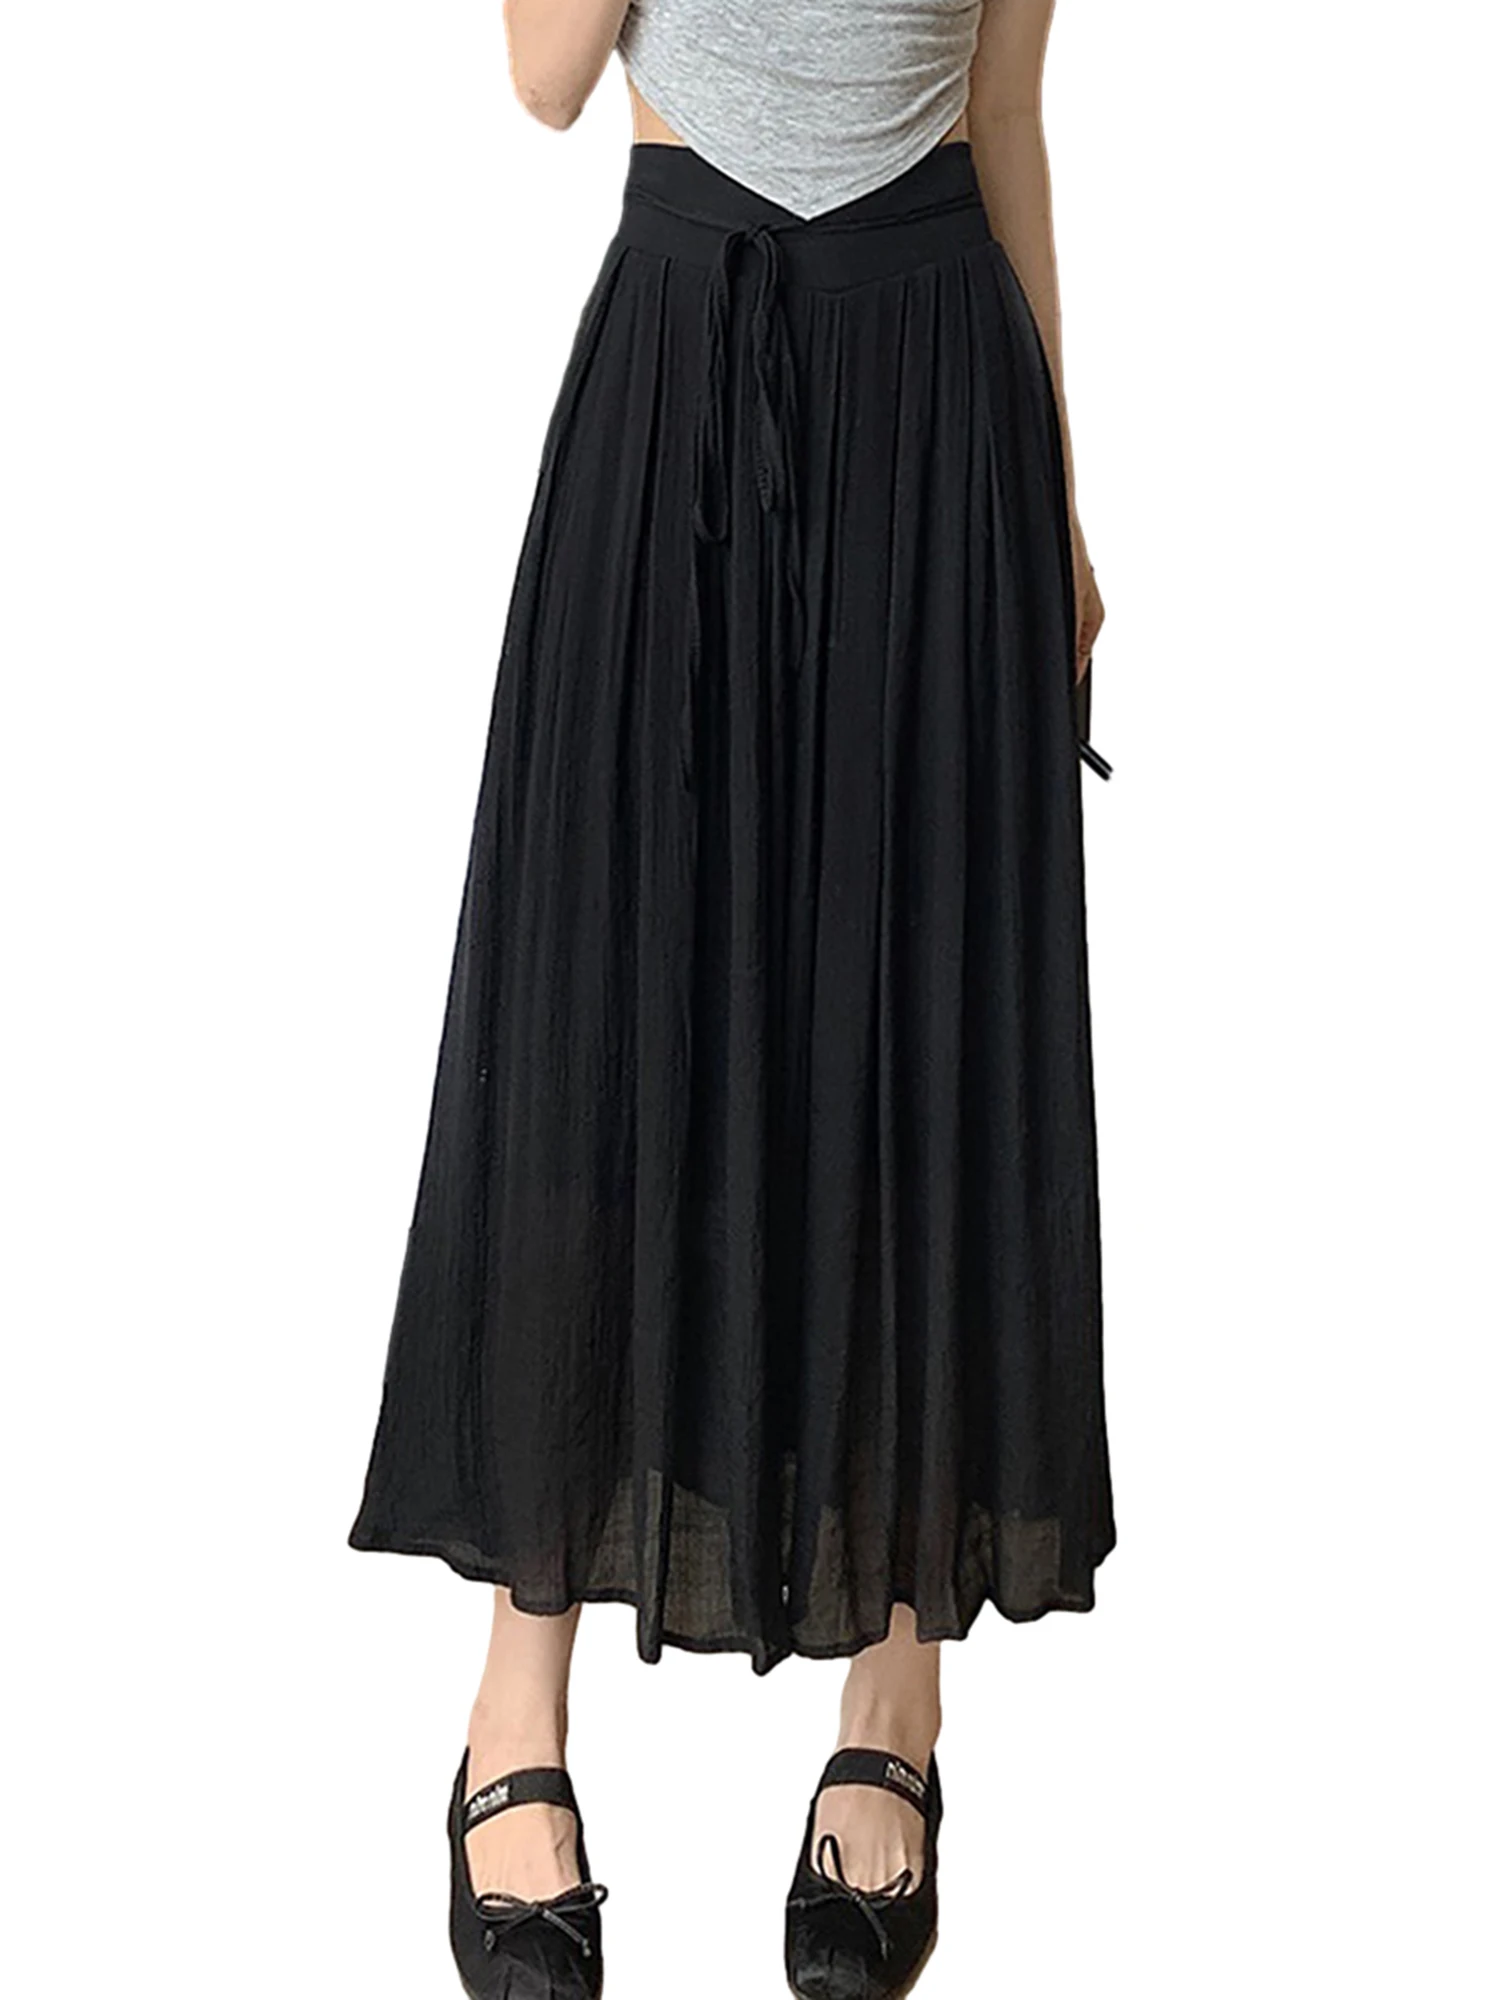 

Stylish Double Layered A-line Midi Skirt with Elastic High Waist and Tie-Up Detail for Women s Spring and Summer Fashion in